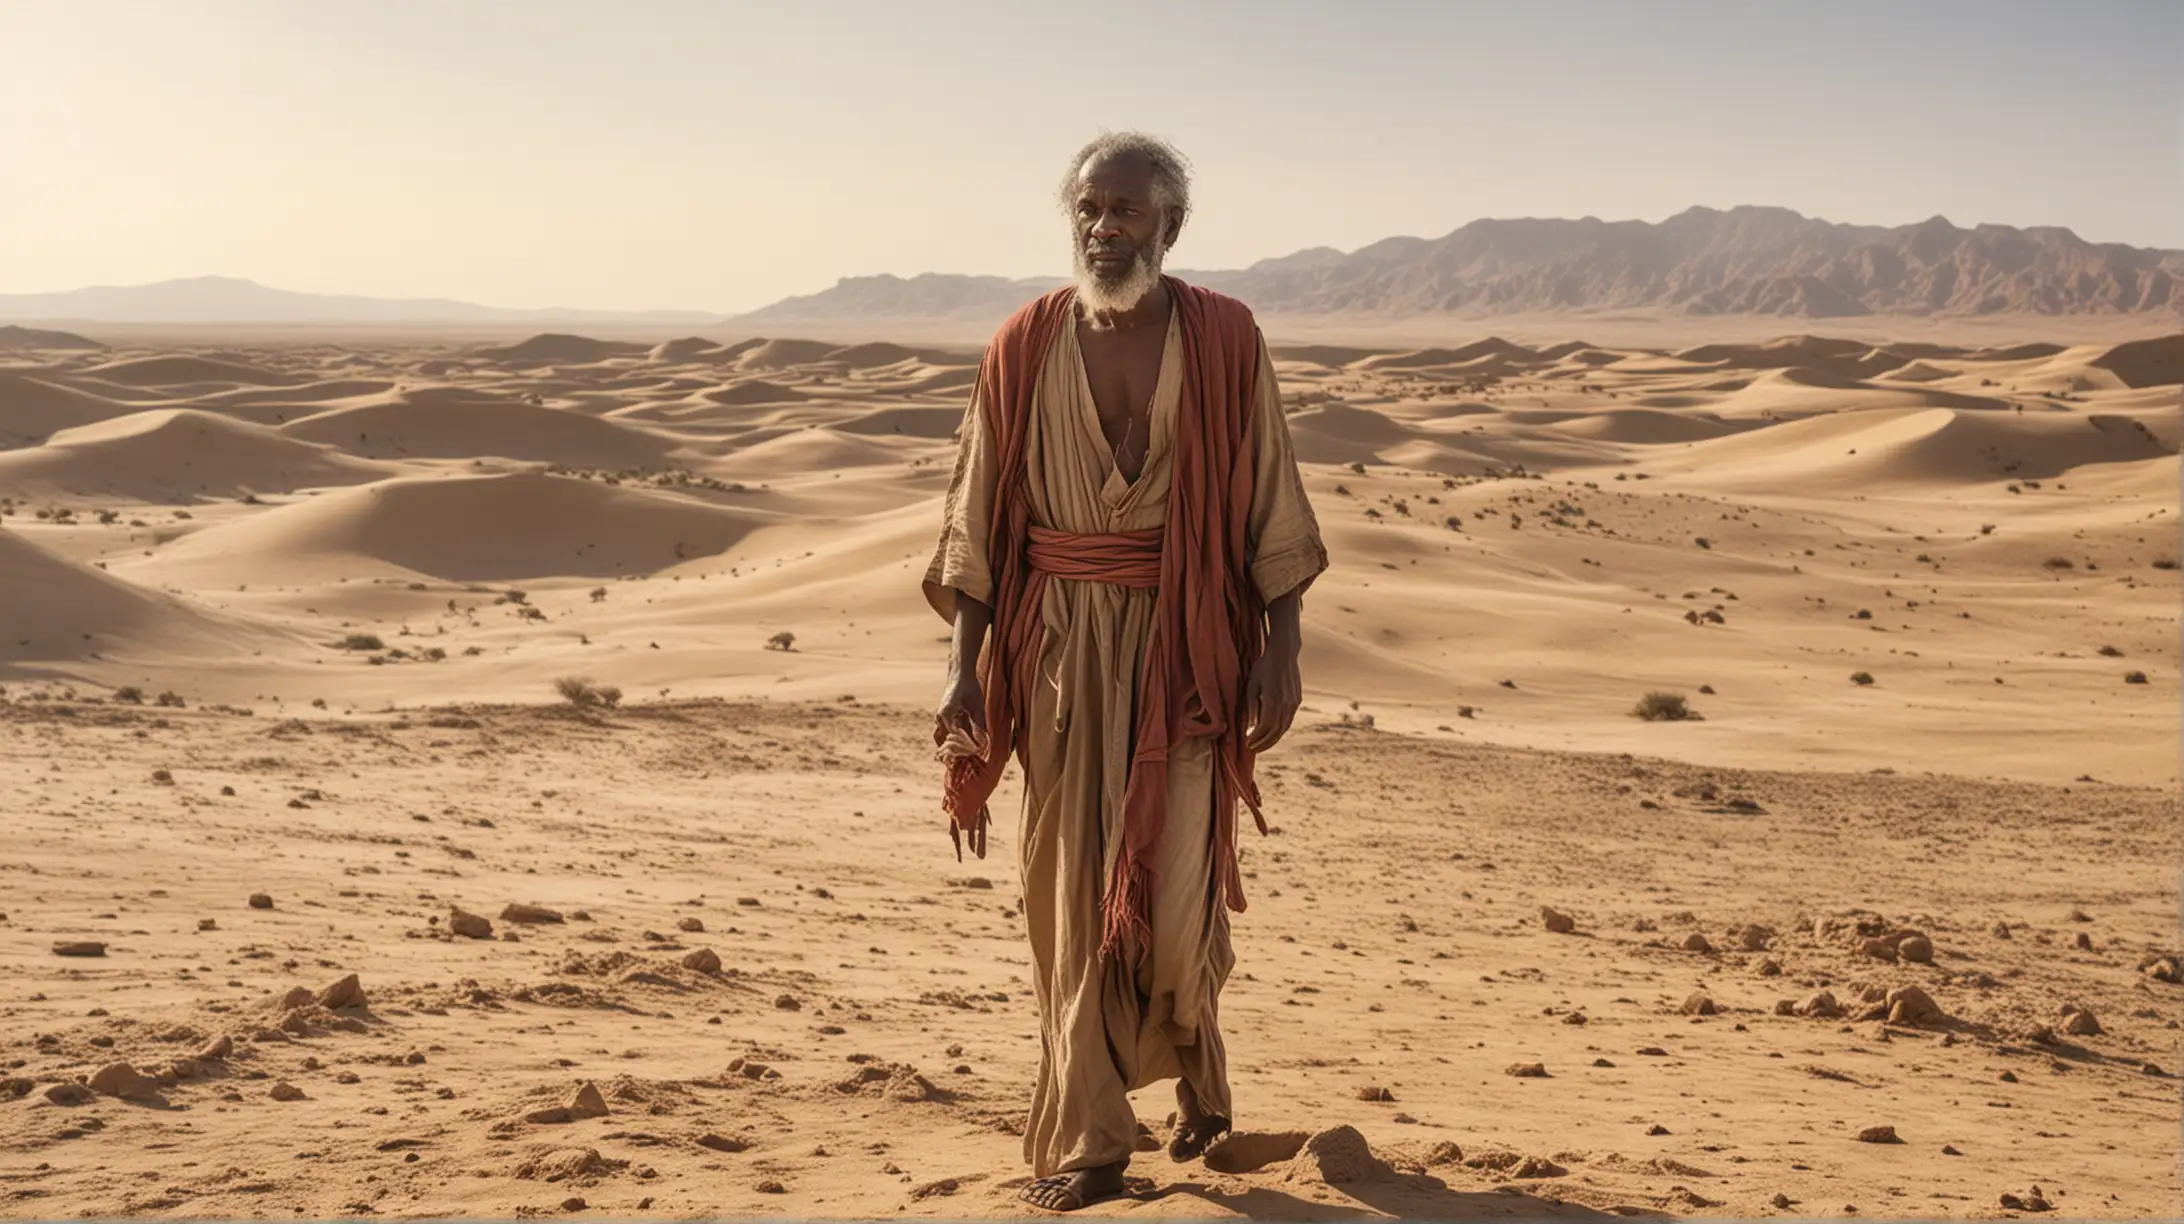 A borrower, being released from his debt, in a desert location, set during the era of Moses